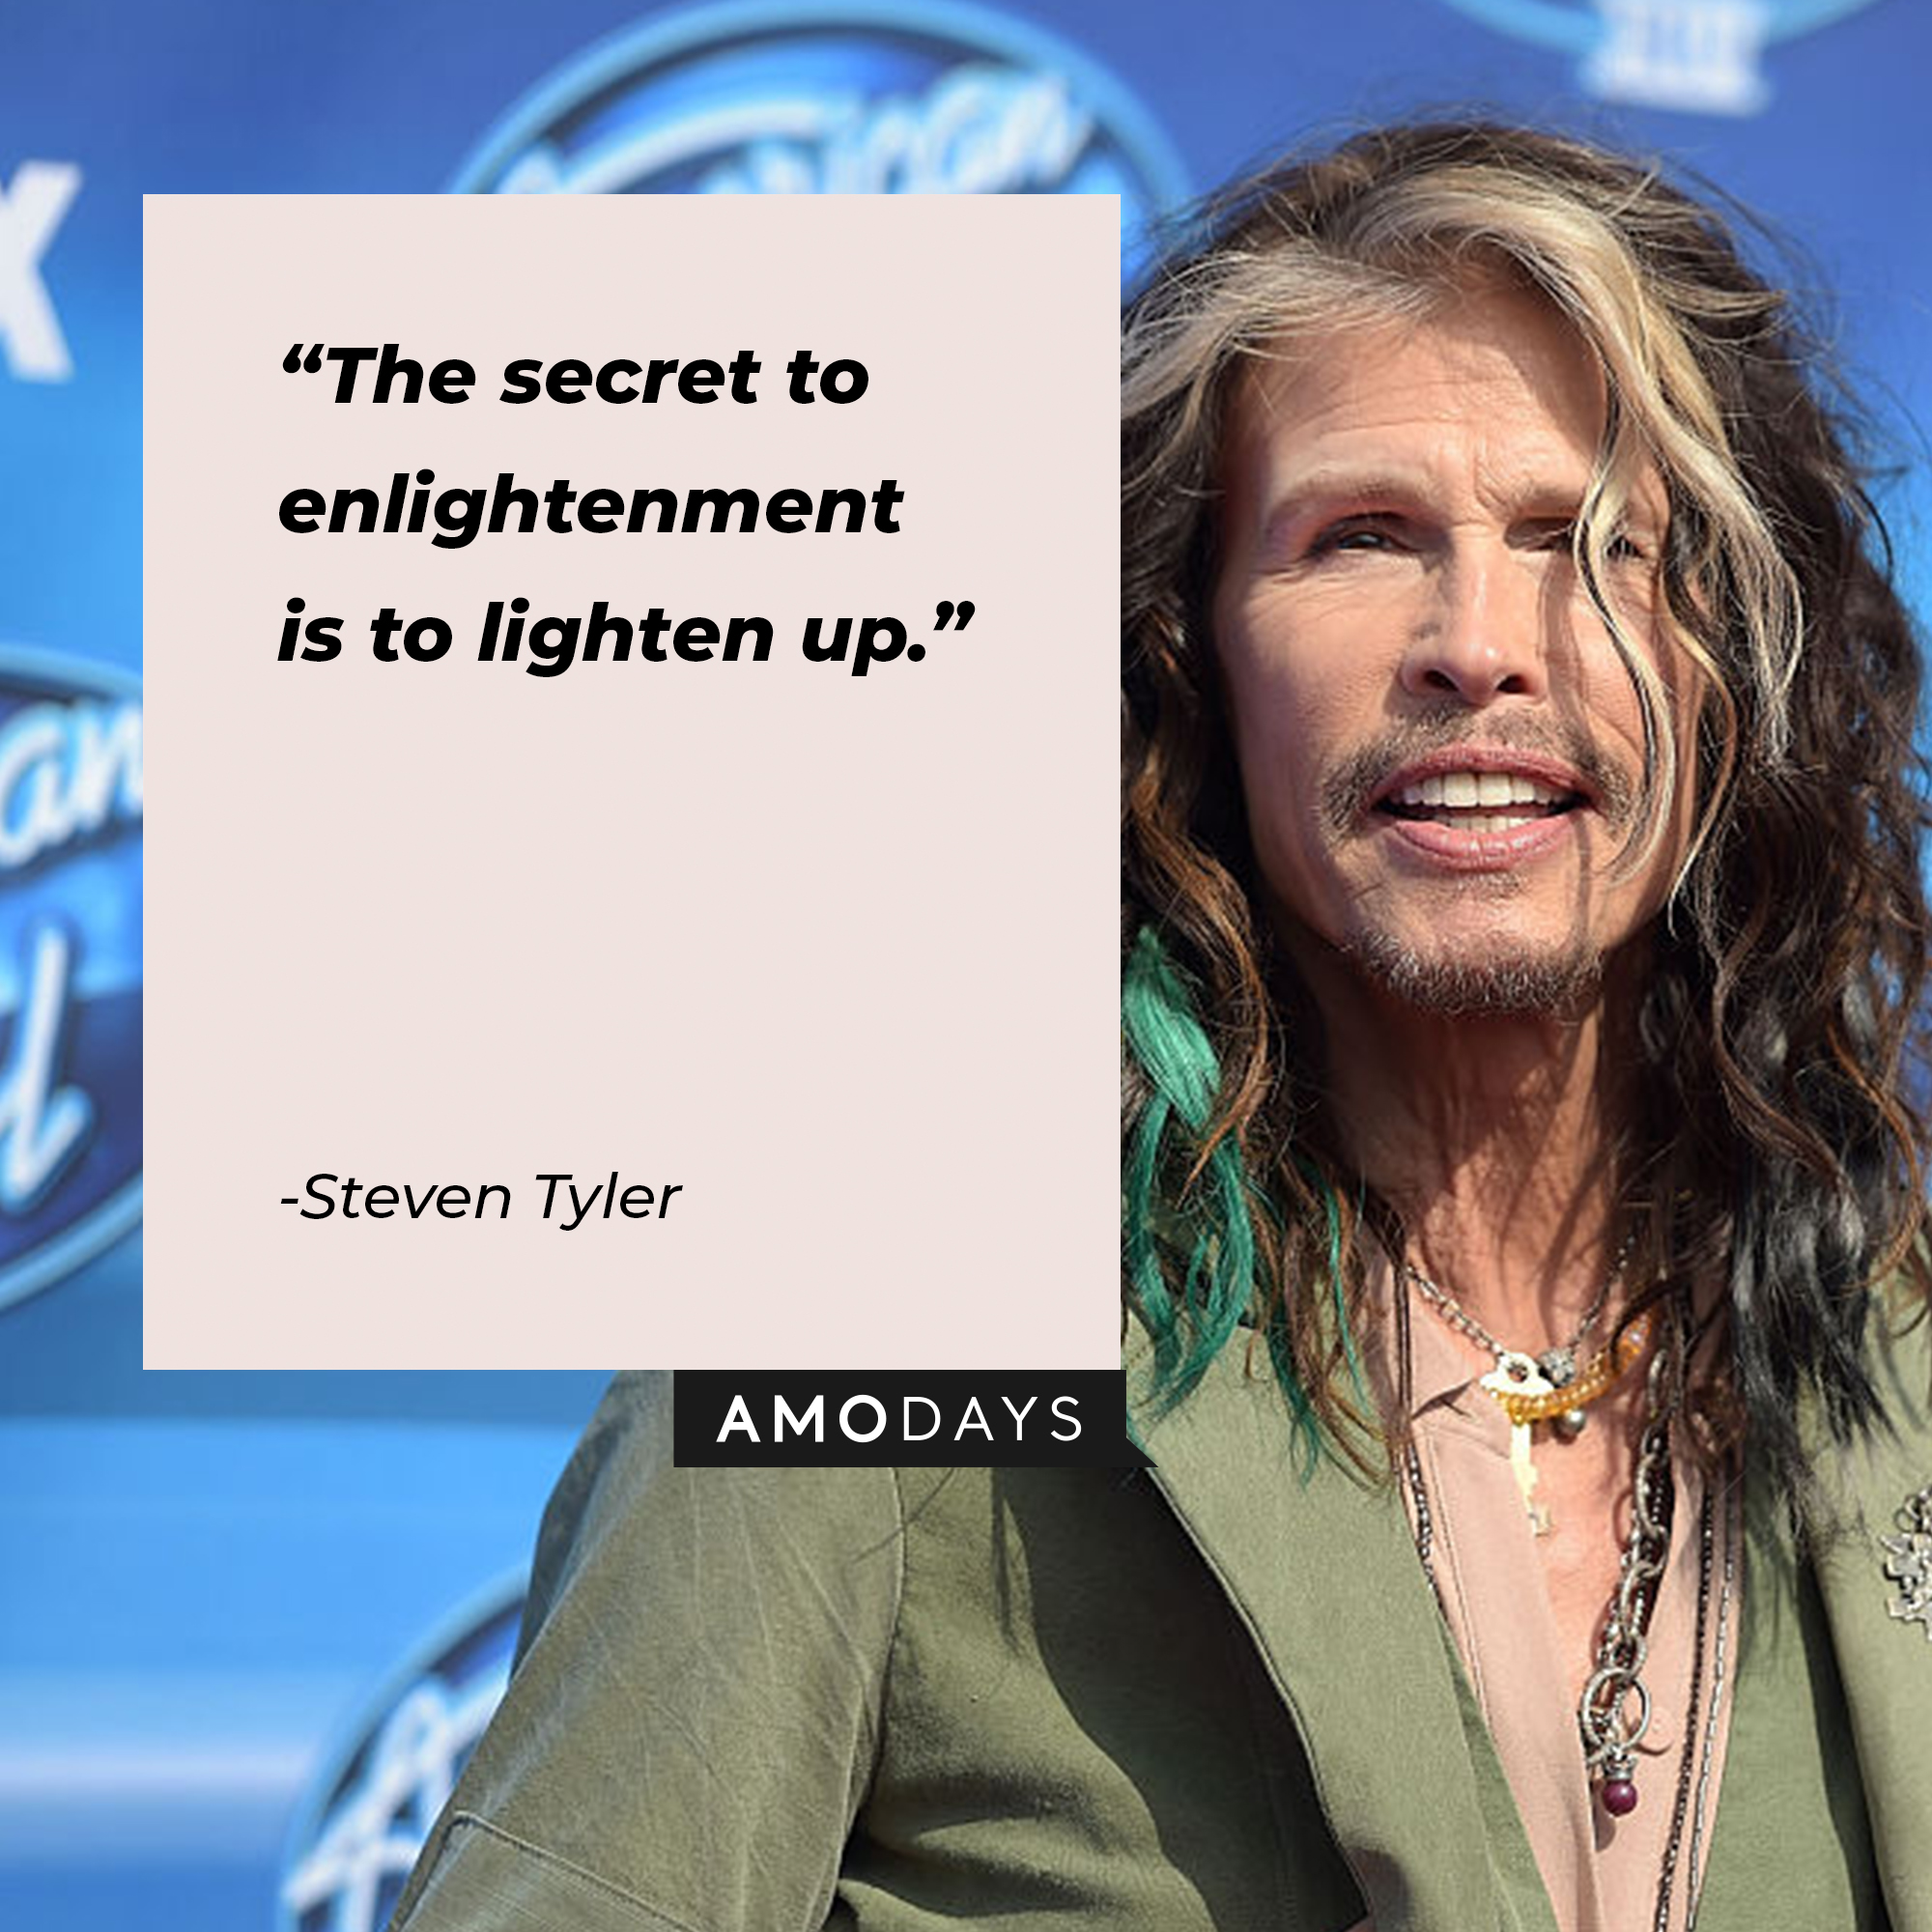 Steven Tyler's quote: "The secret to enlightenment is to lighten up." | Source: Getty Images